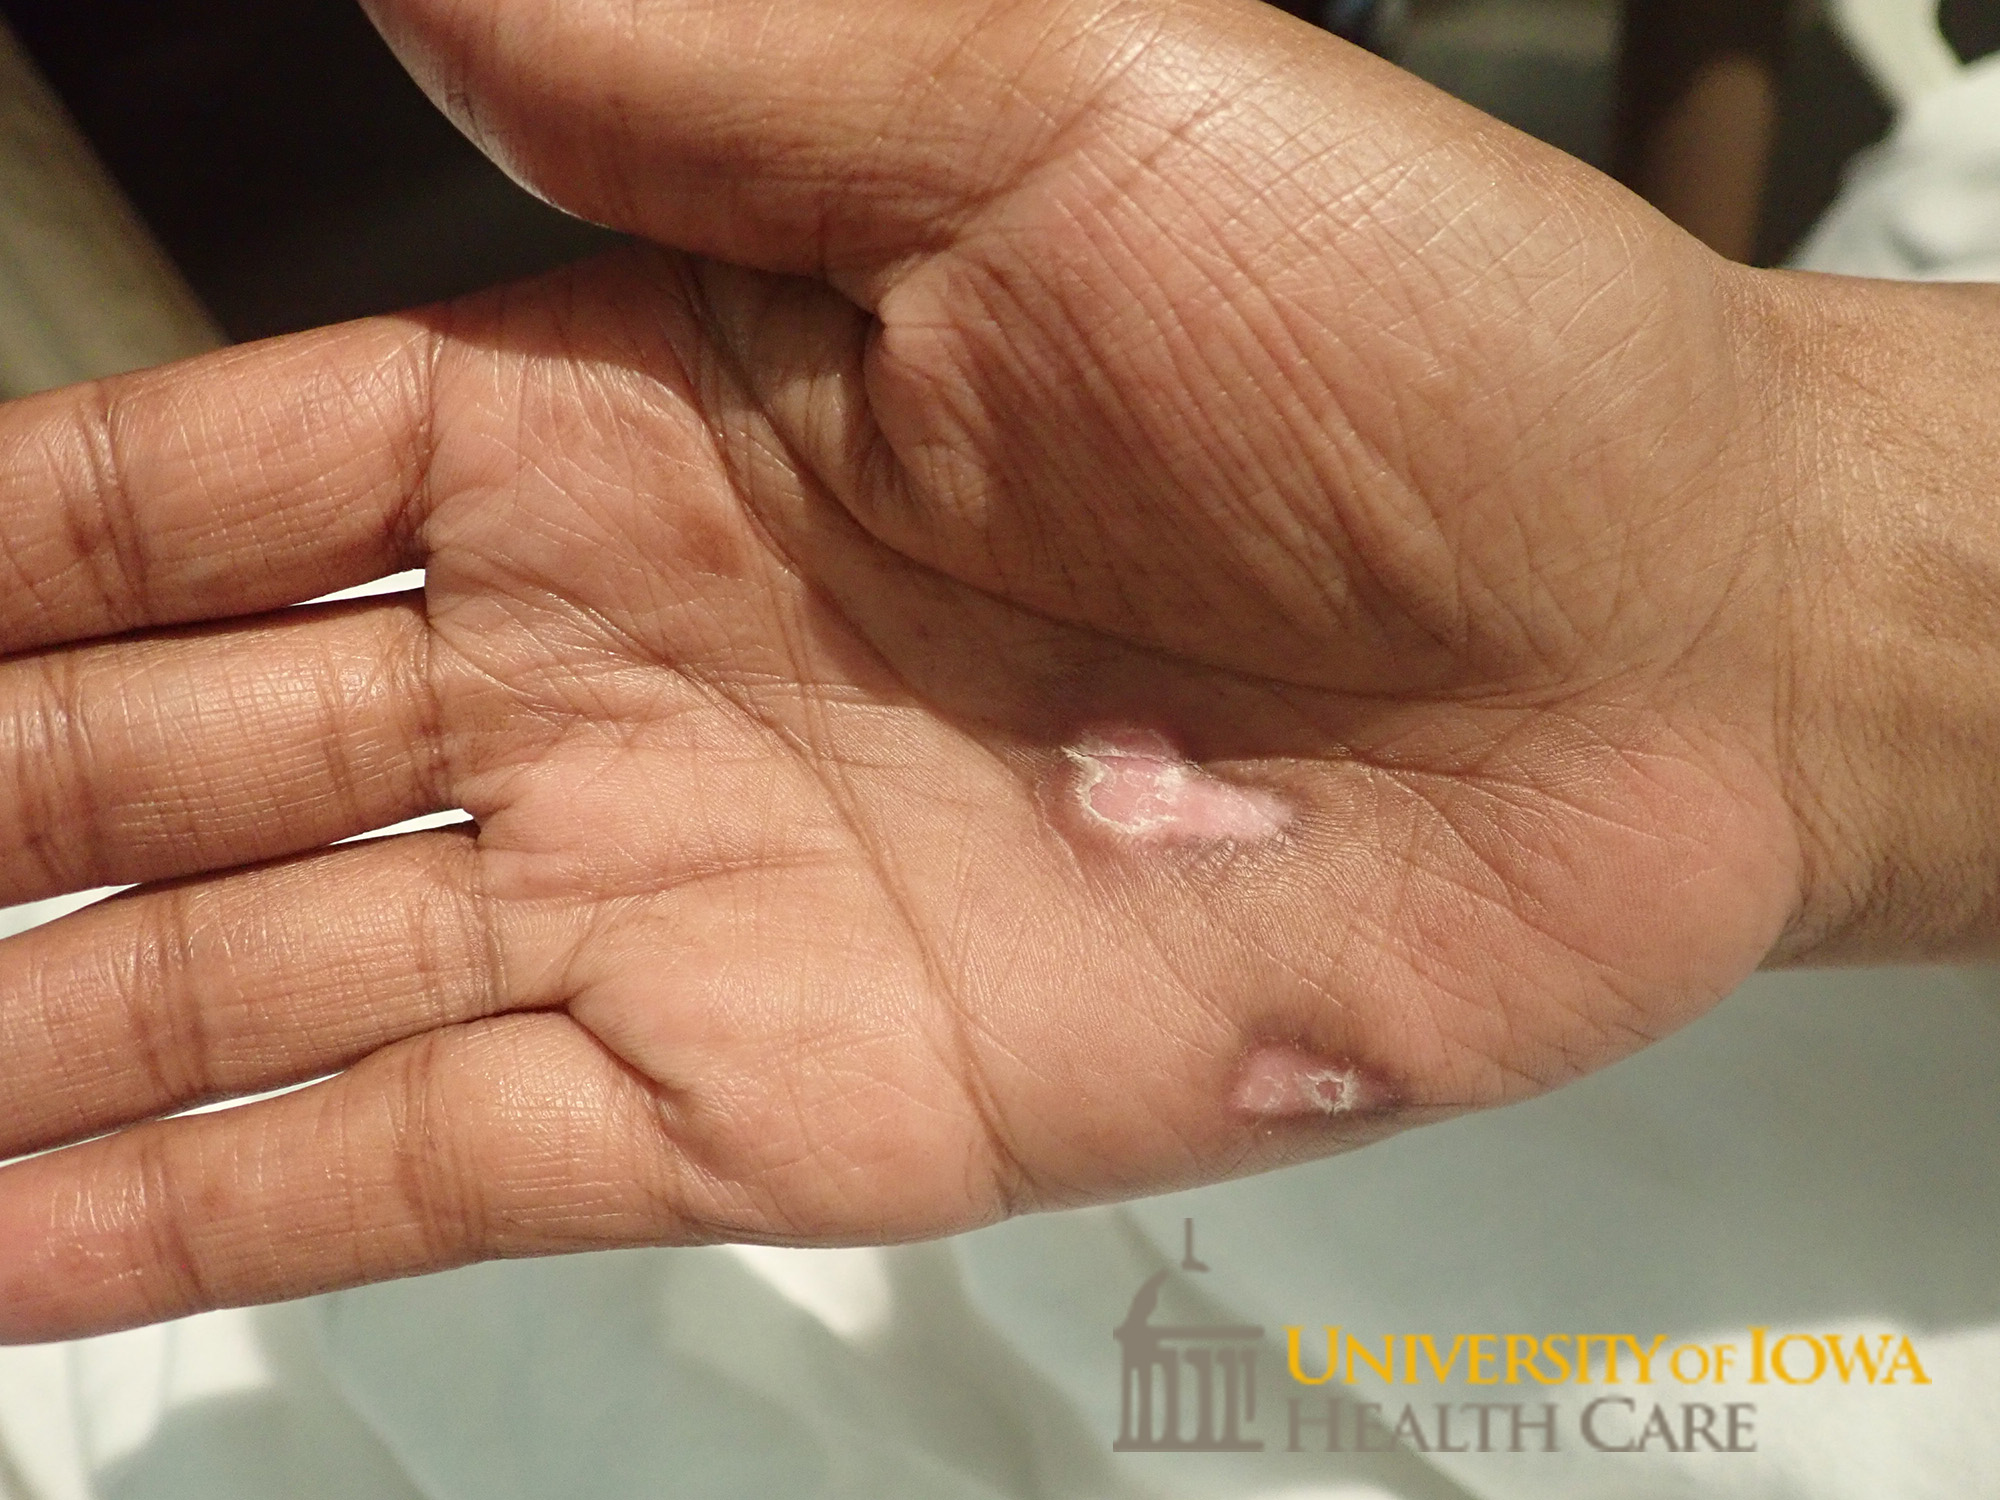 Well demaracated, shiny, and atrophic plaque with central depigmentation and rim of hyperpigmentation and central scale on the palm. (click images for higher resolution).